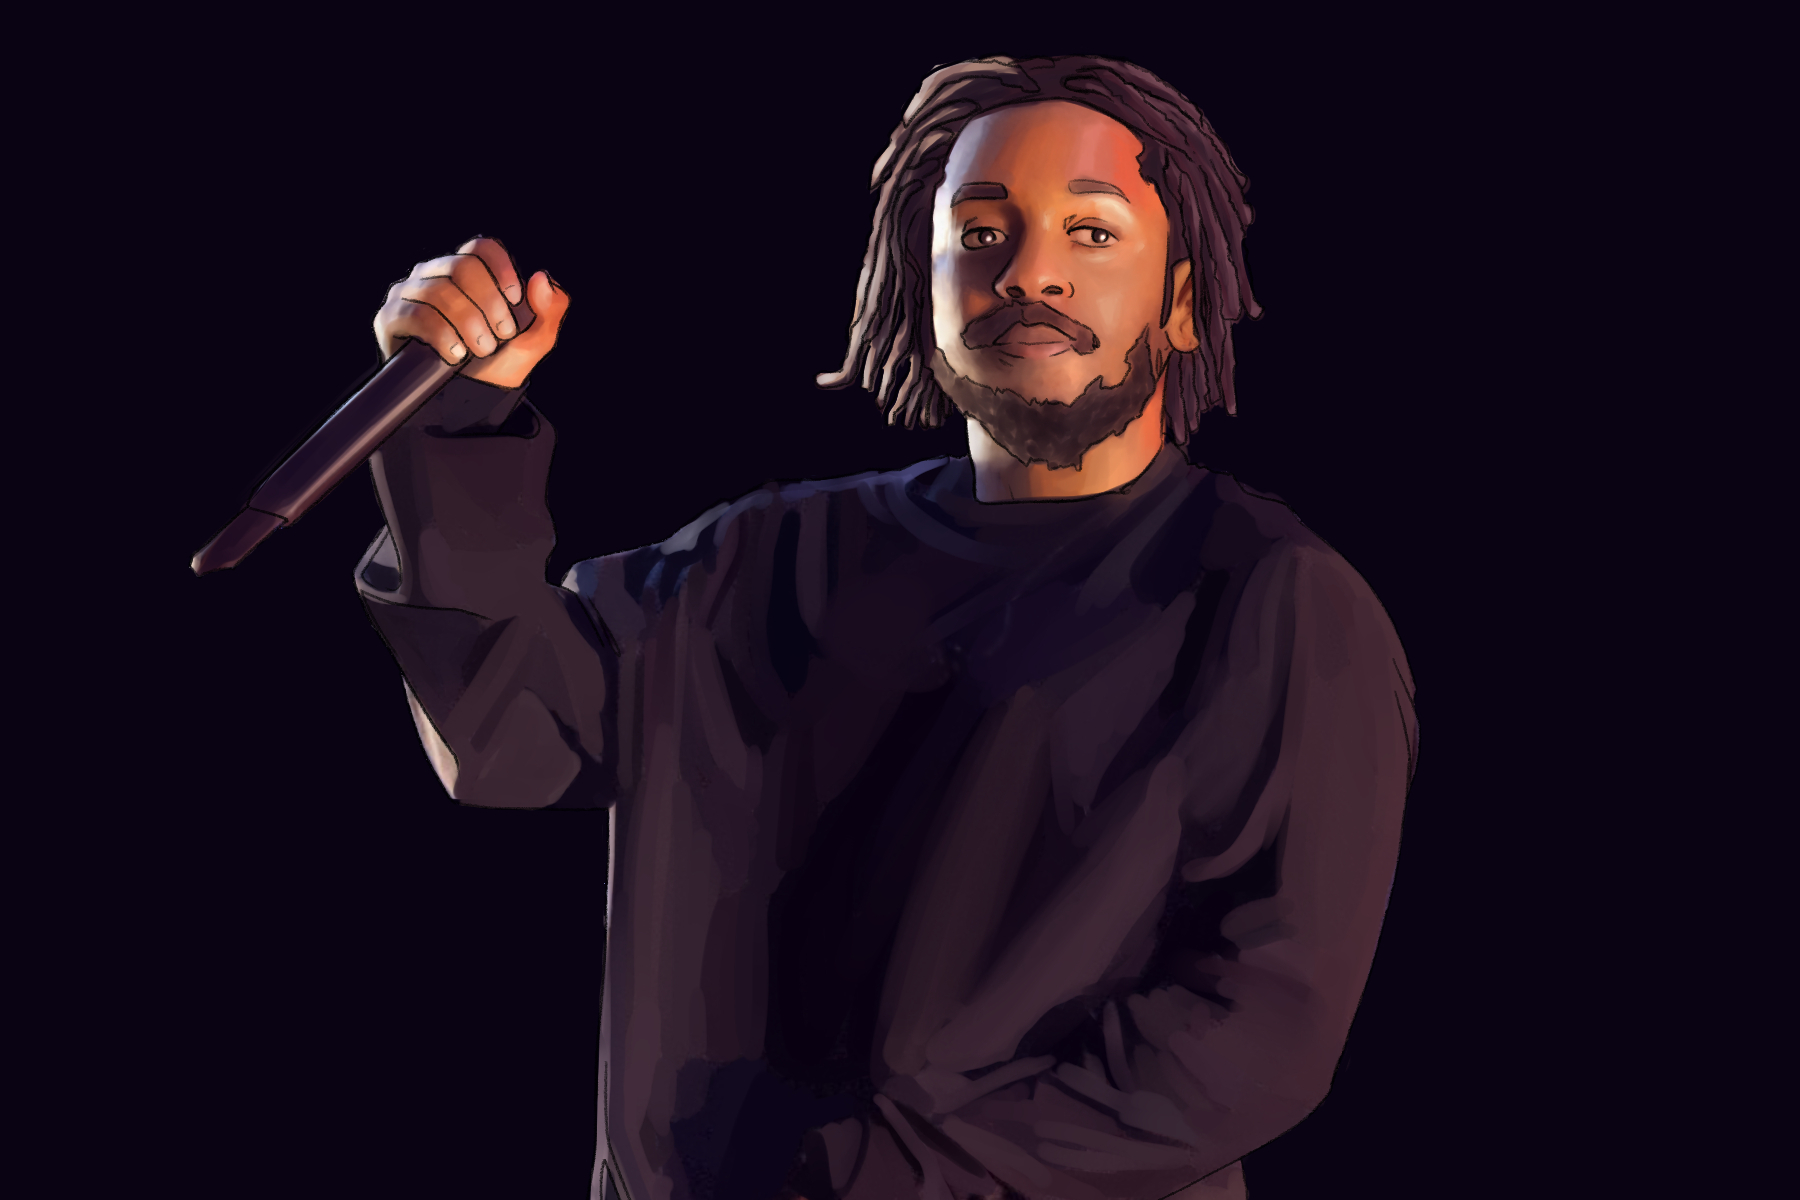 Kendrick holding a mic in his right hand